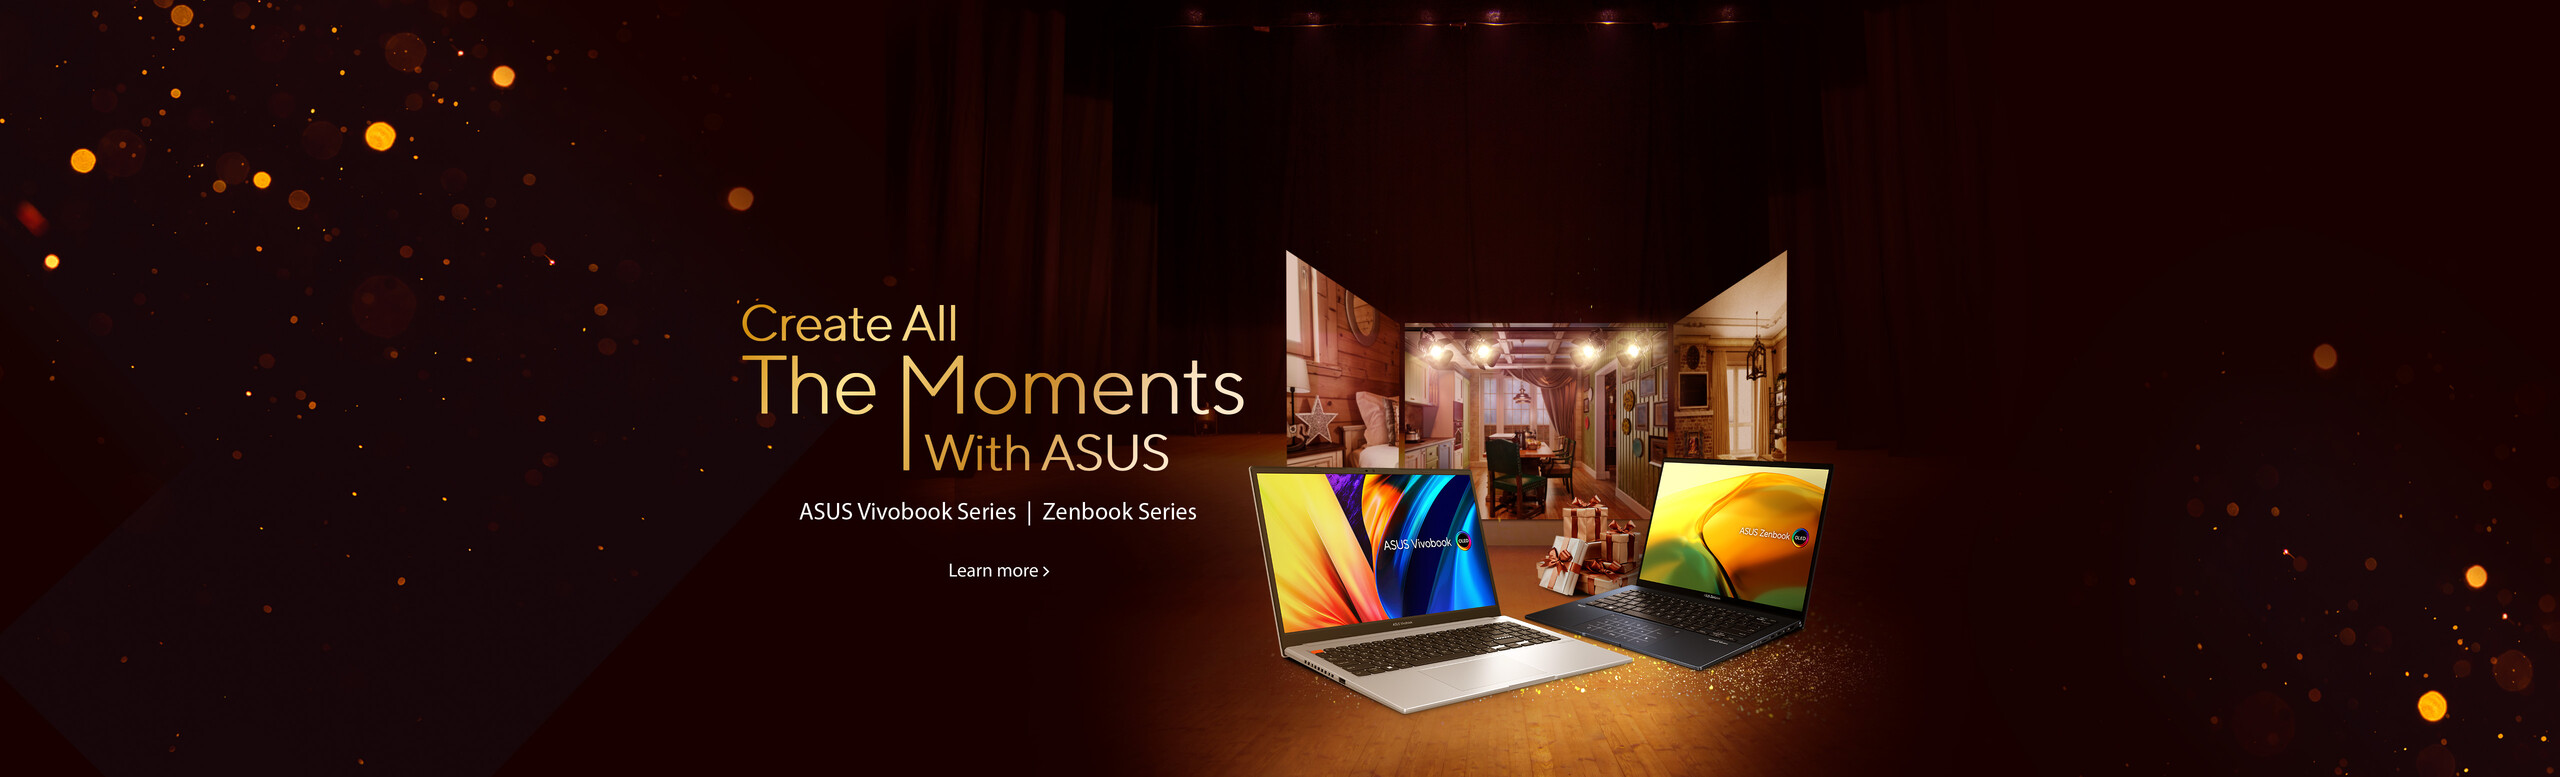 Create all the moments with ASUS, ASUS Holiday campaign. Zenbook 14 OLED and Vivobook S 15 OLED presenting their deisgn.